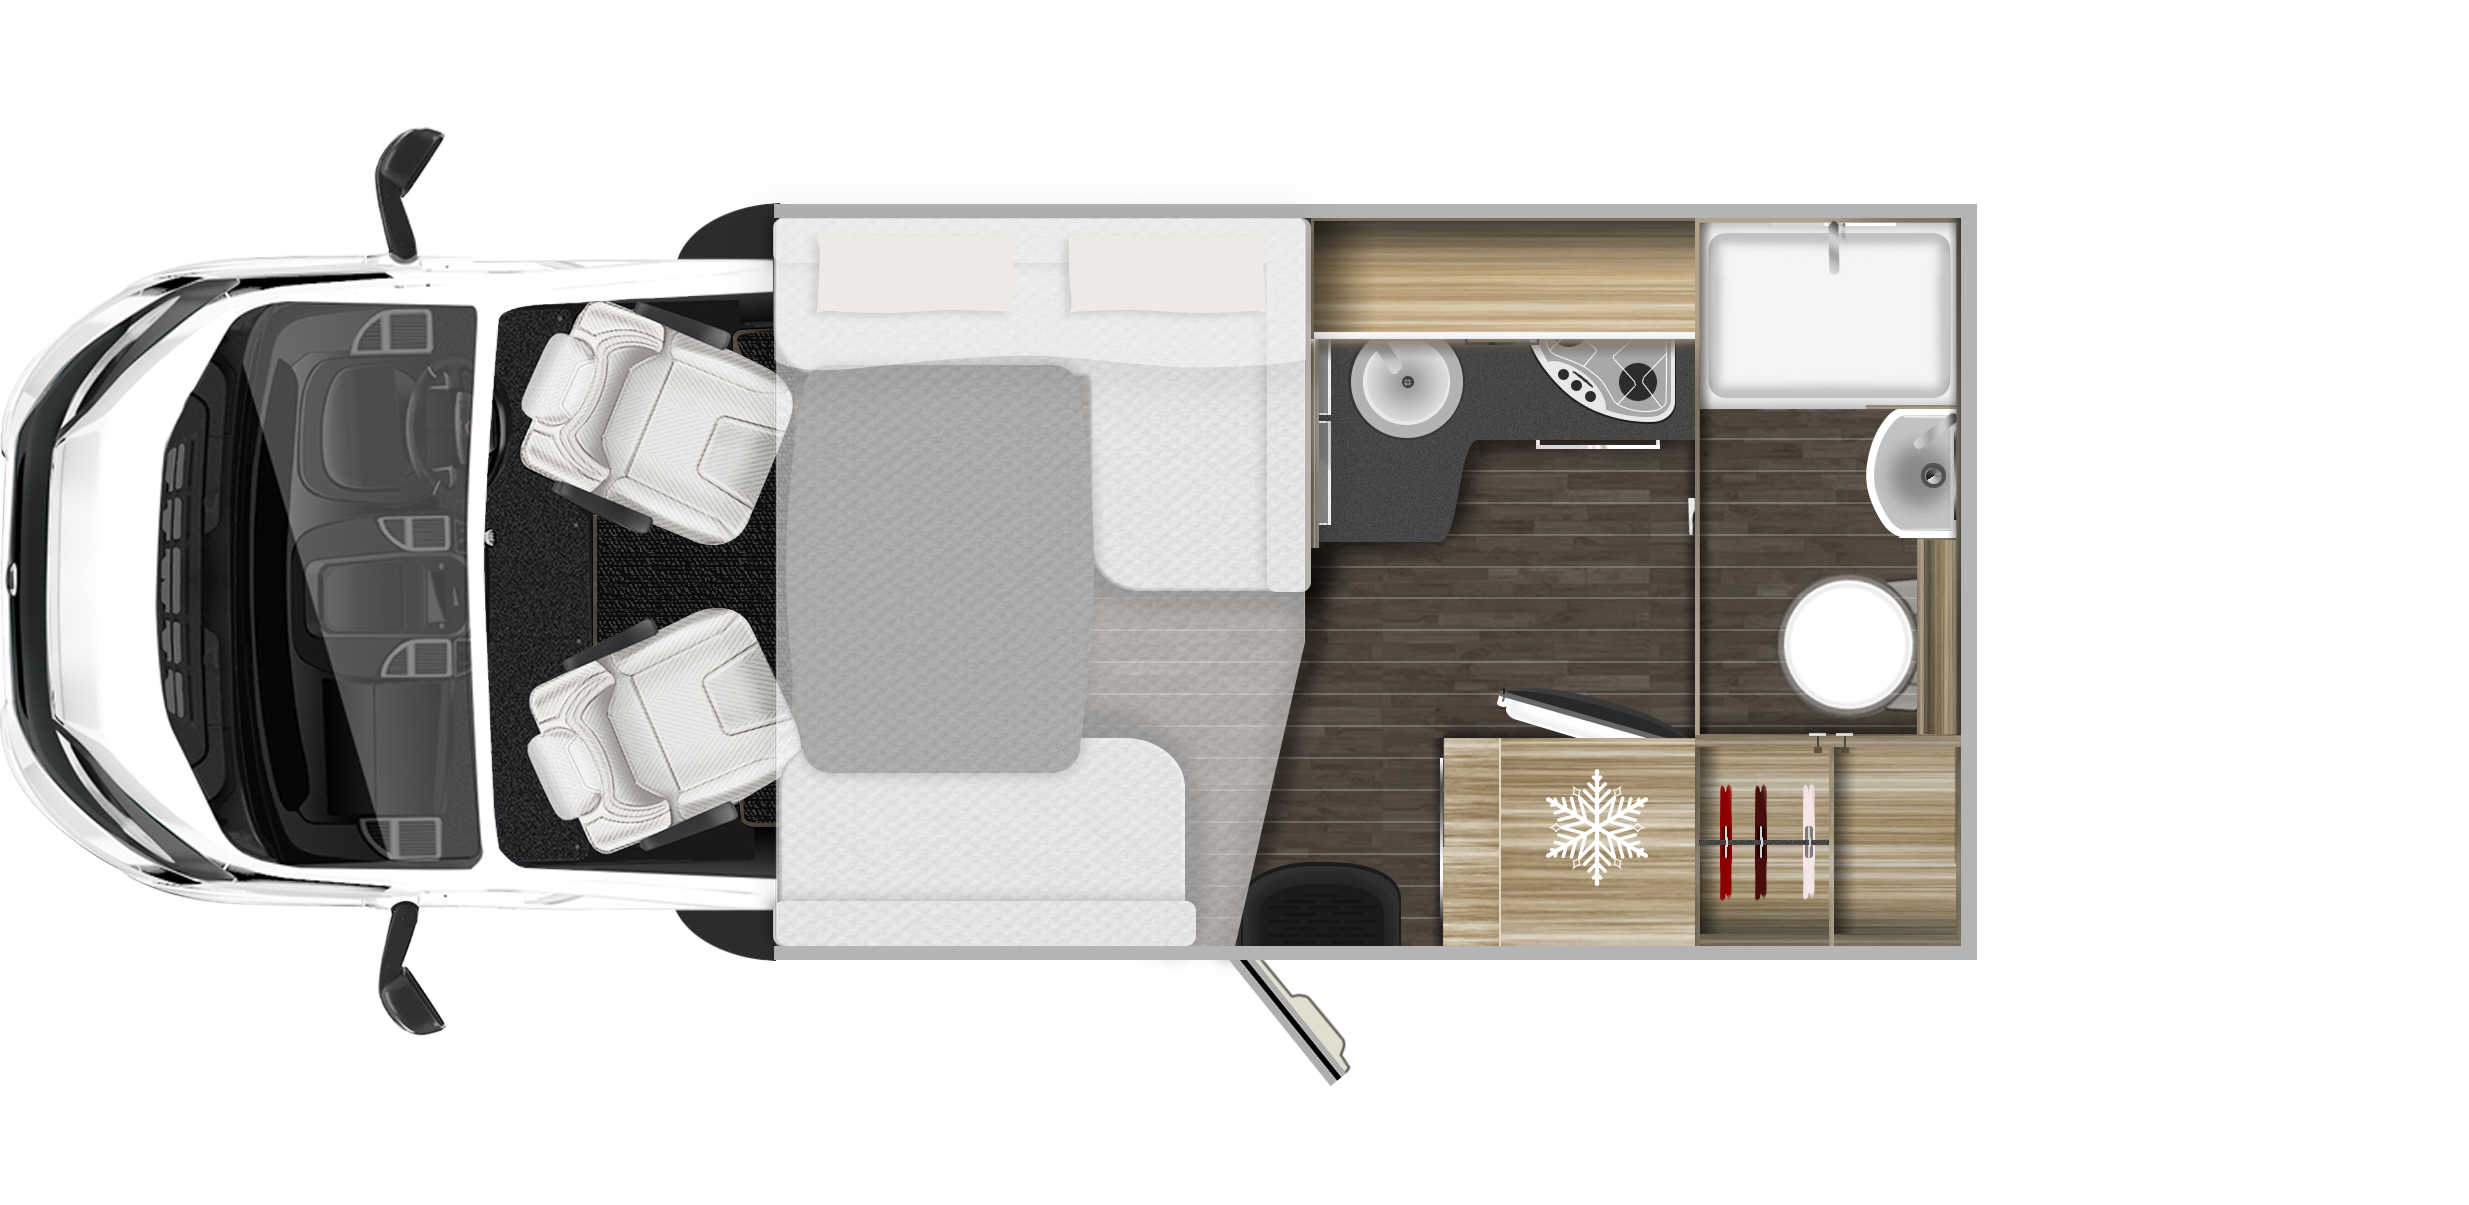 2020 Roller Team T-Line 590 (Automatic) New Motorhome layout